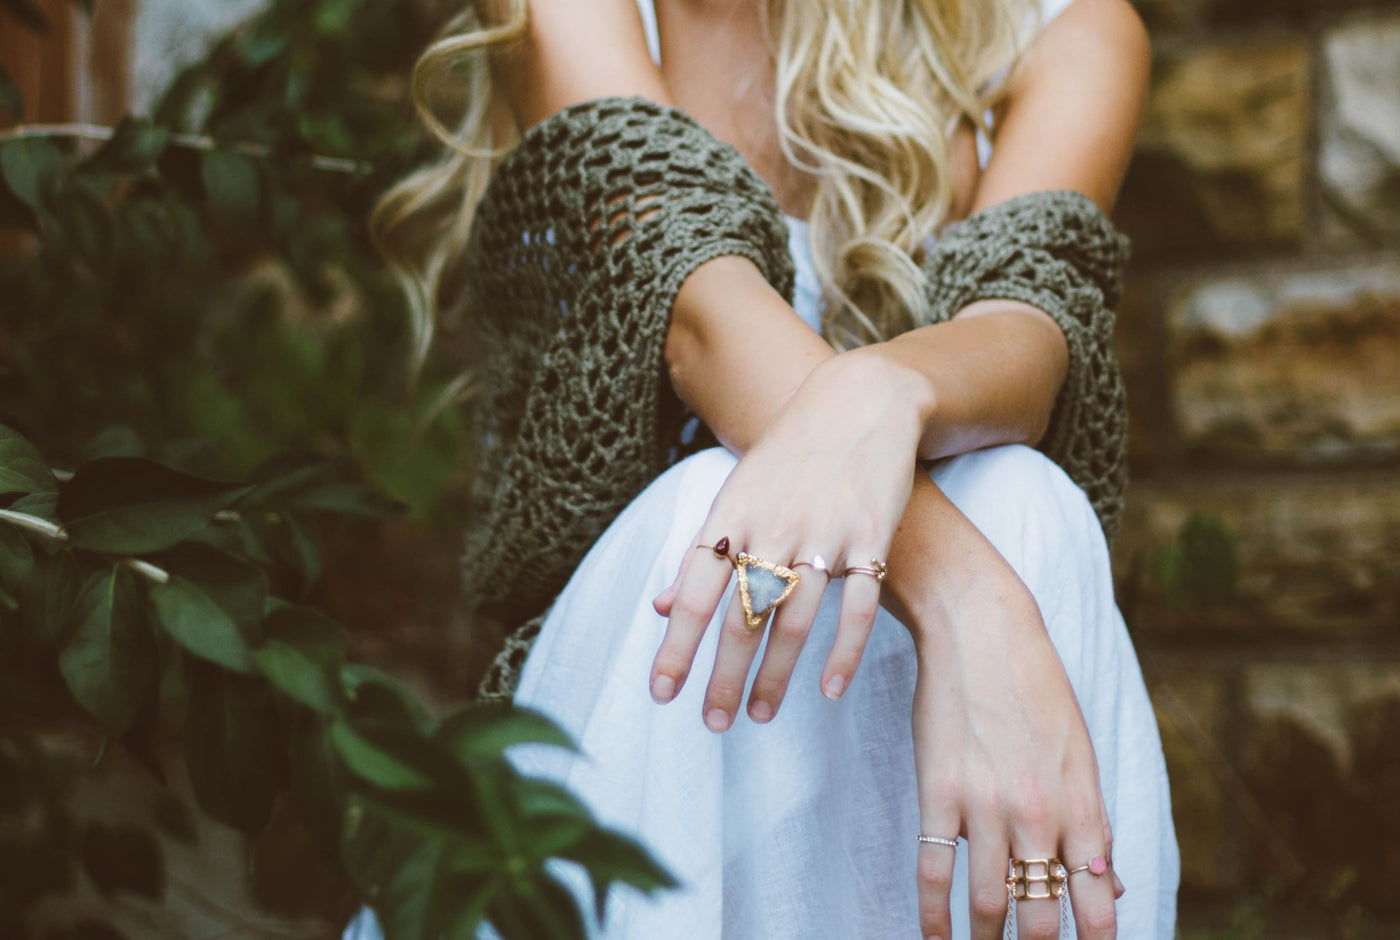 Woman's hands with custom jewelry